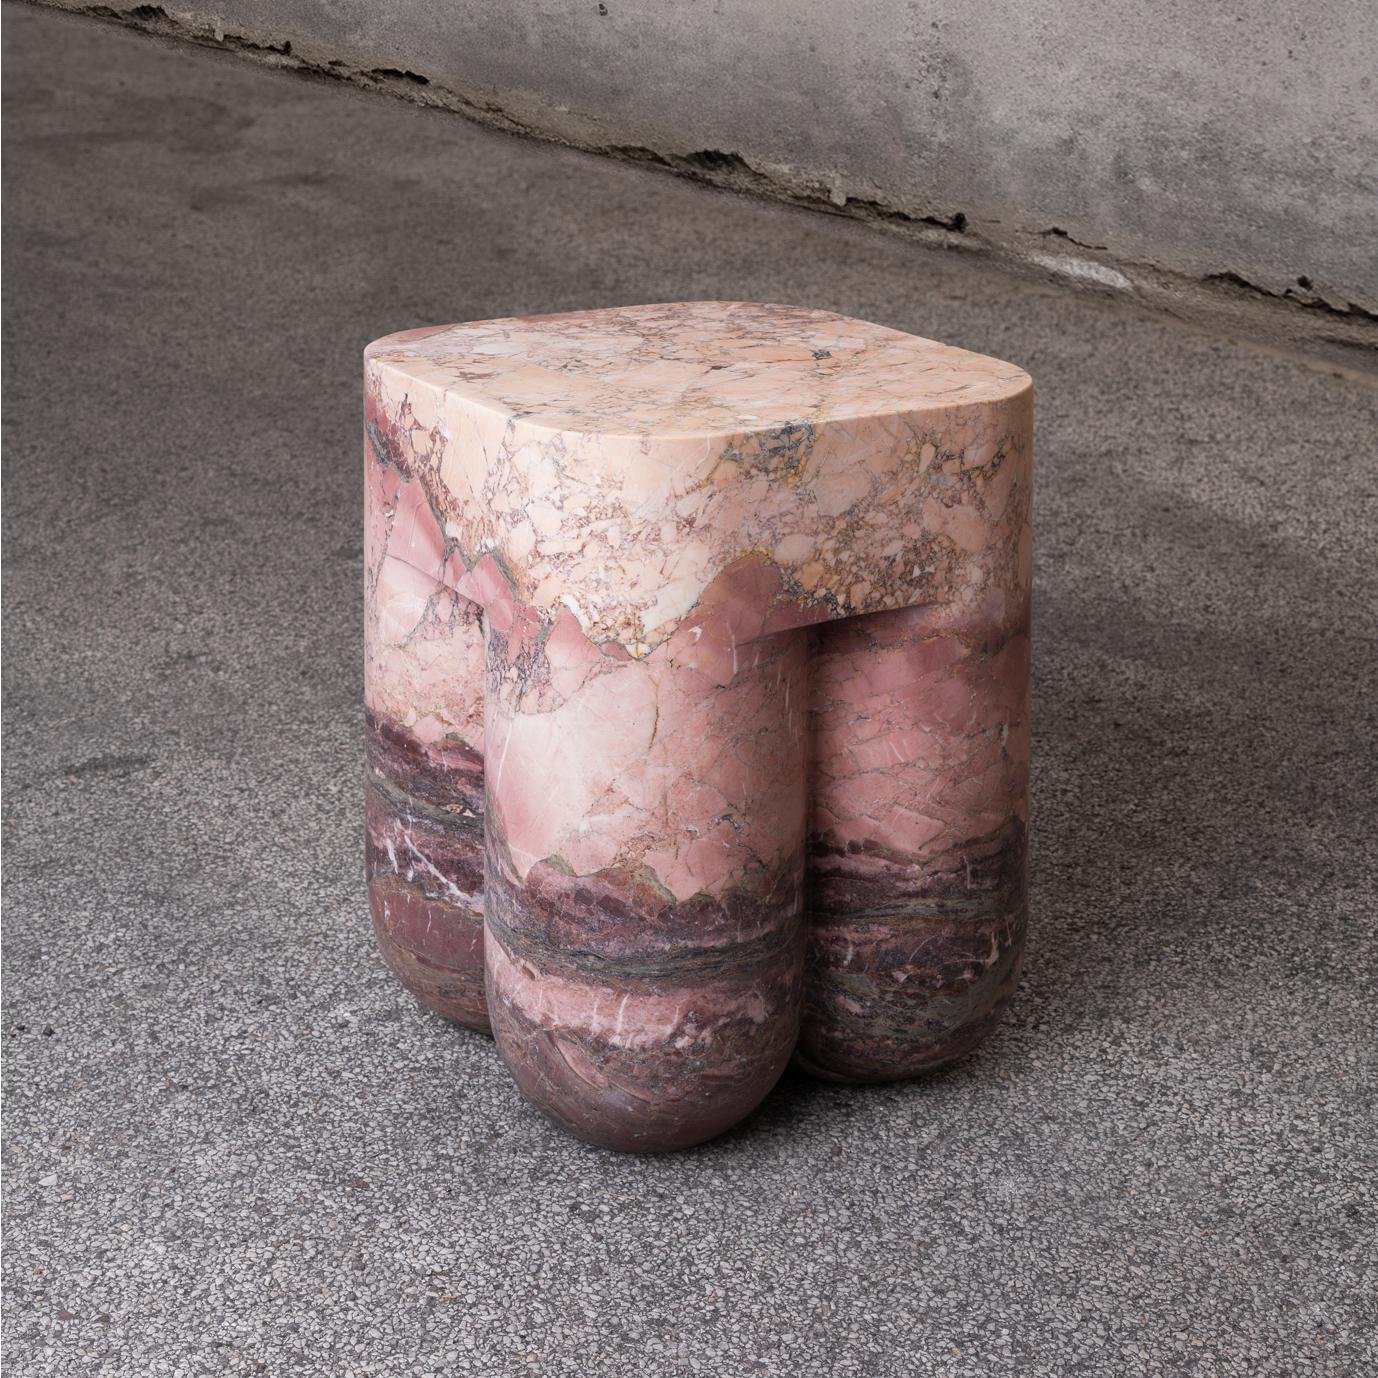 Chunky AQ stool and side table is a Limited Edition design collectible, skillfully carved from a single block of Breccia Medicea dell' Acquasanta. With its extraordinary color variations and layers, Chunky AQ tells the story of one of the rarest